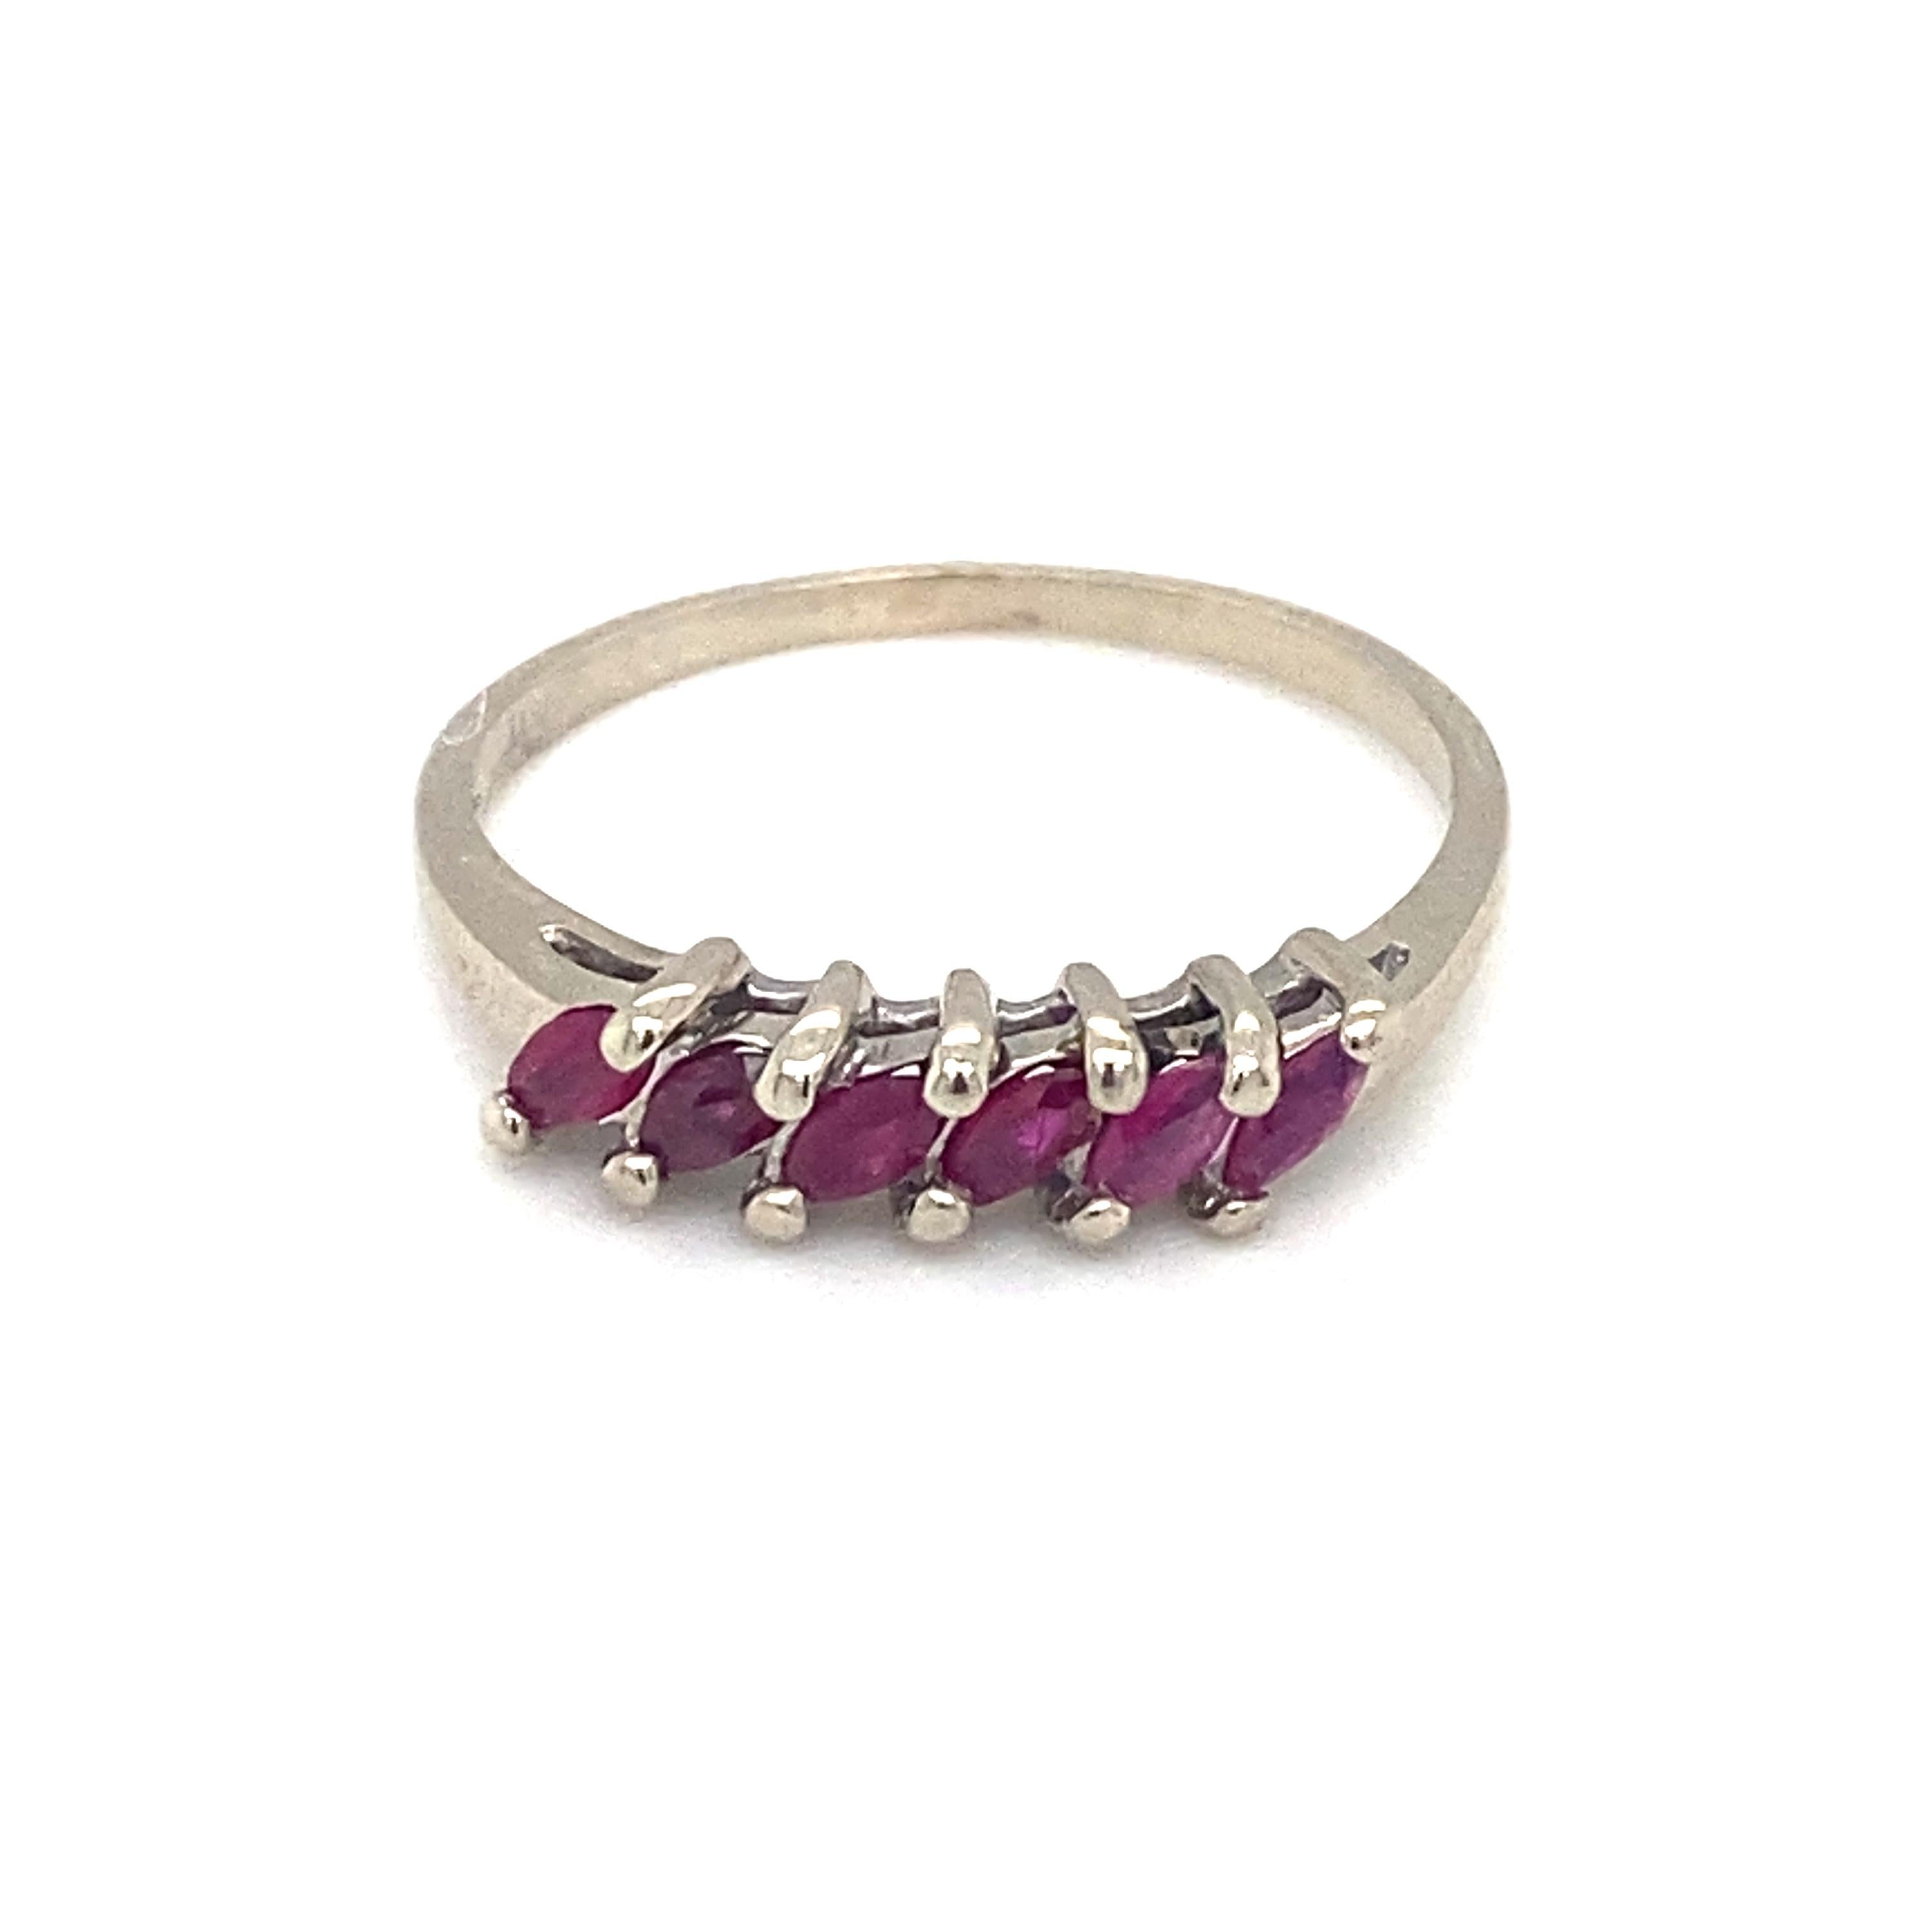 
Item Details: This unique band features marquise rubies at over a quarter of a carat. 

Circa: 1950s
Metal Type: 10k white gold
Weight: 1.8g
Size: US 8.25, resizable

Ruby Details:

Carat: 0.30 carat total weight
Shape: Marquise
Color: Pigeon blood